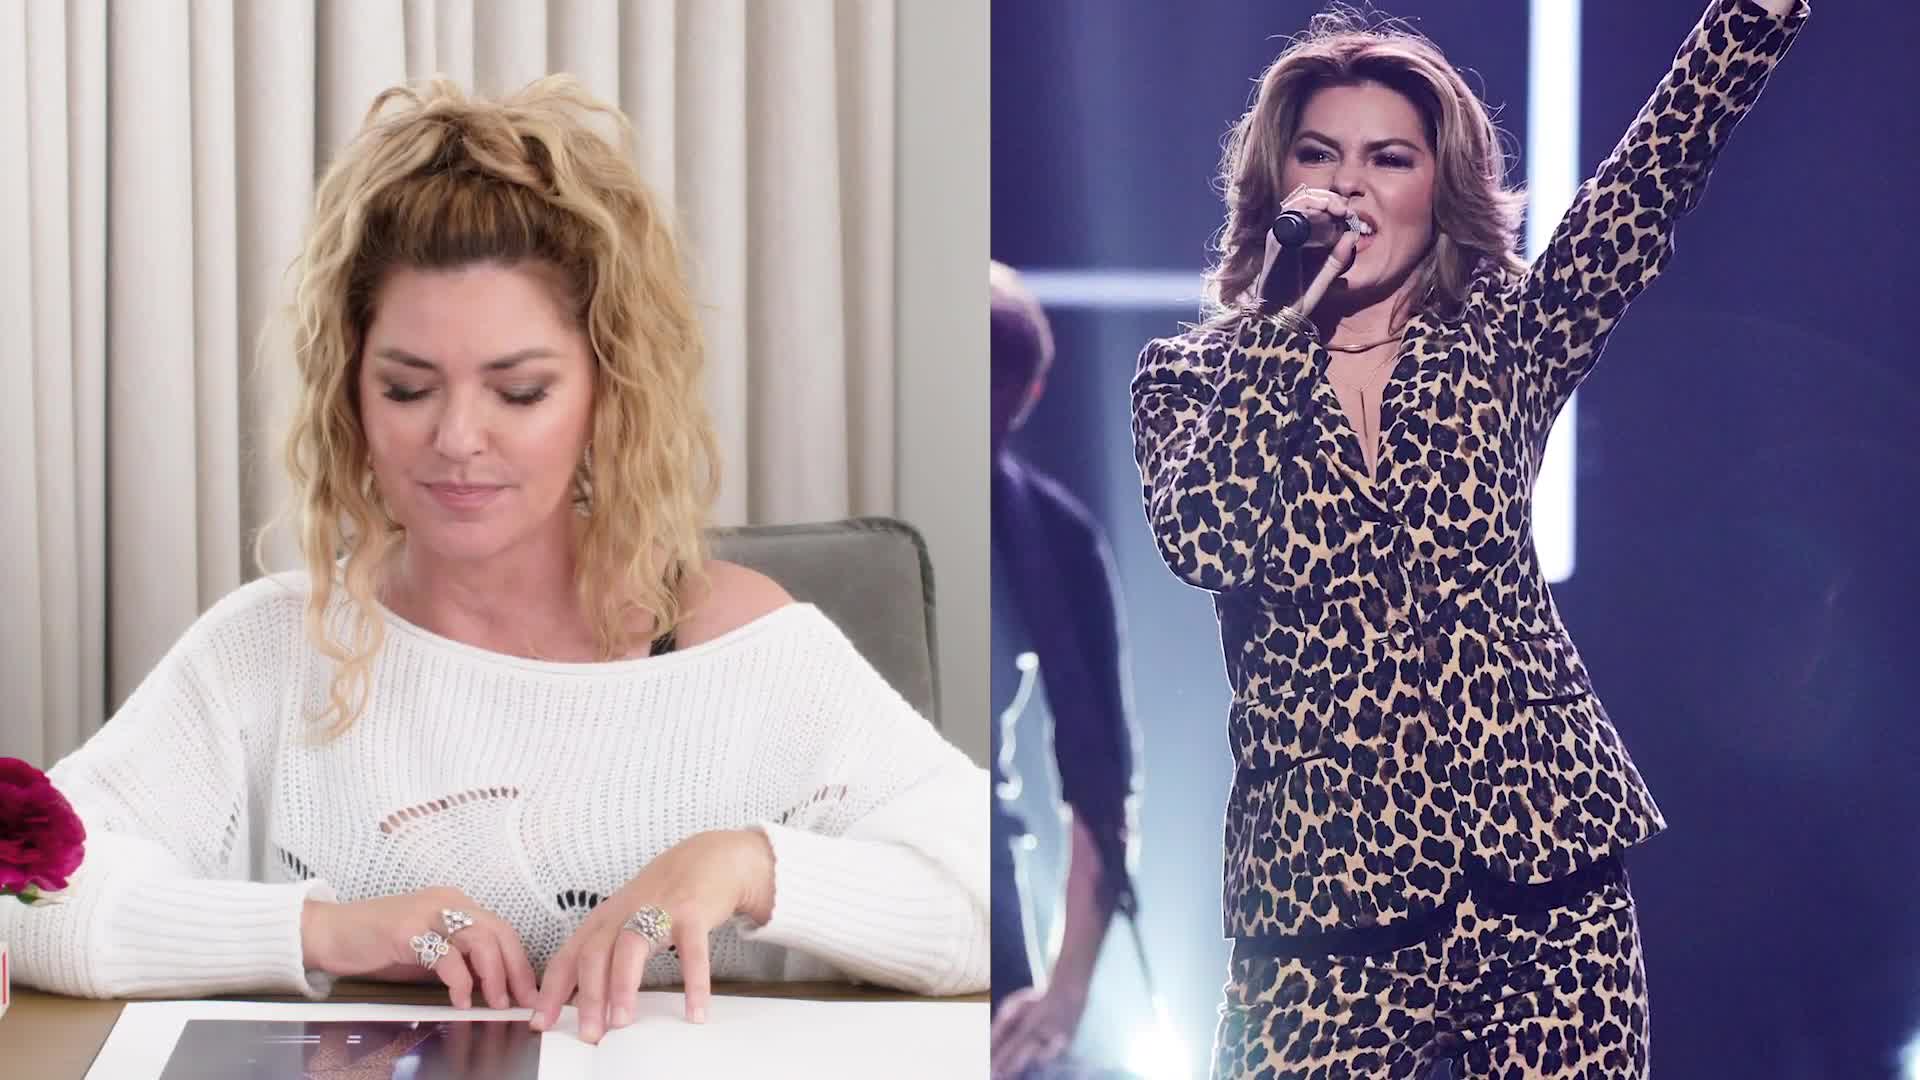 Watch Shania Twain on Her Best Fashion Moments, From Leopard Prints to  Canadian Tuxedos | Life in Looks | Vogue